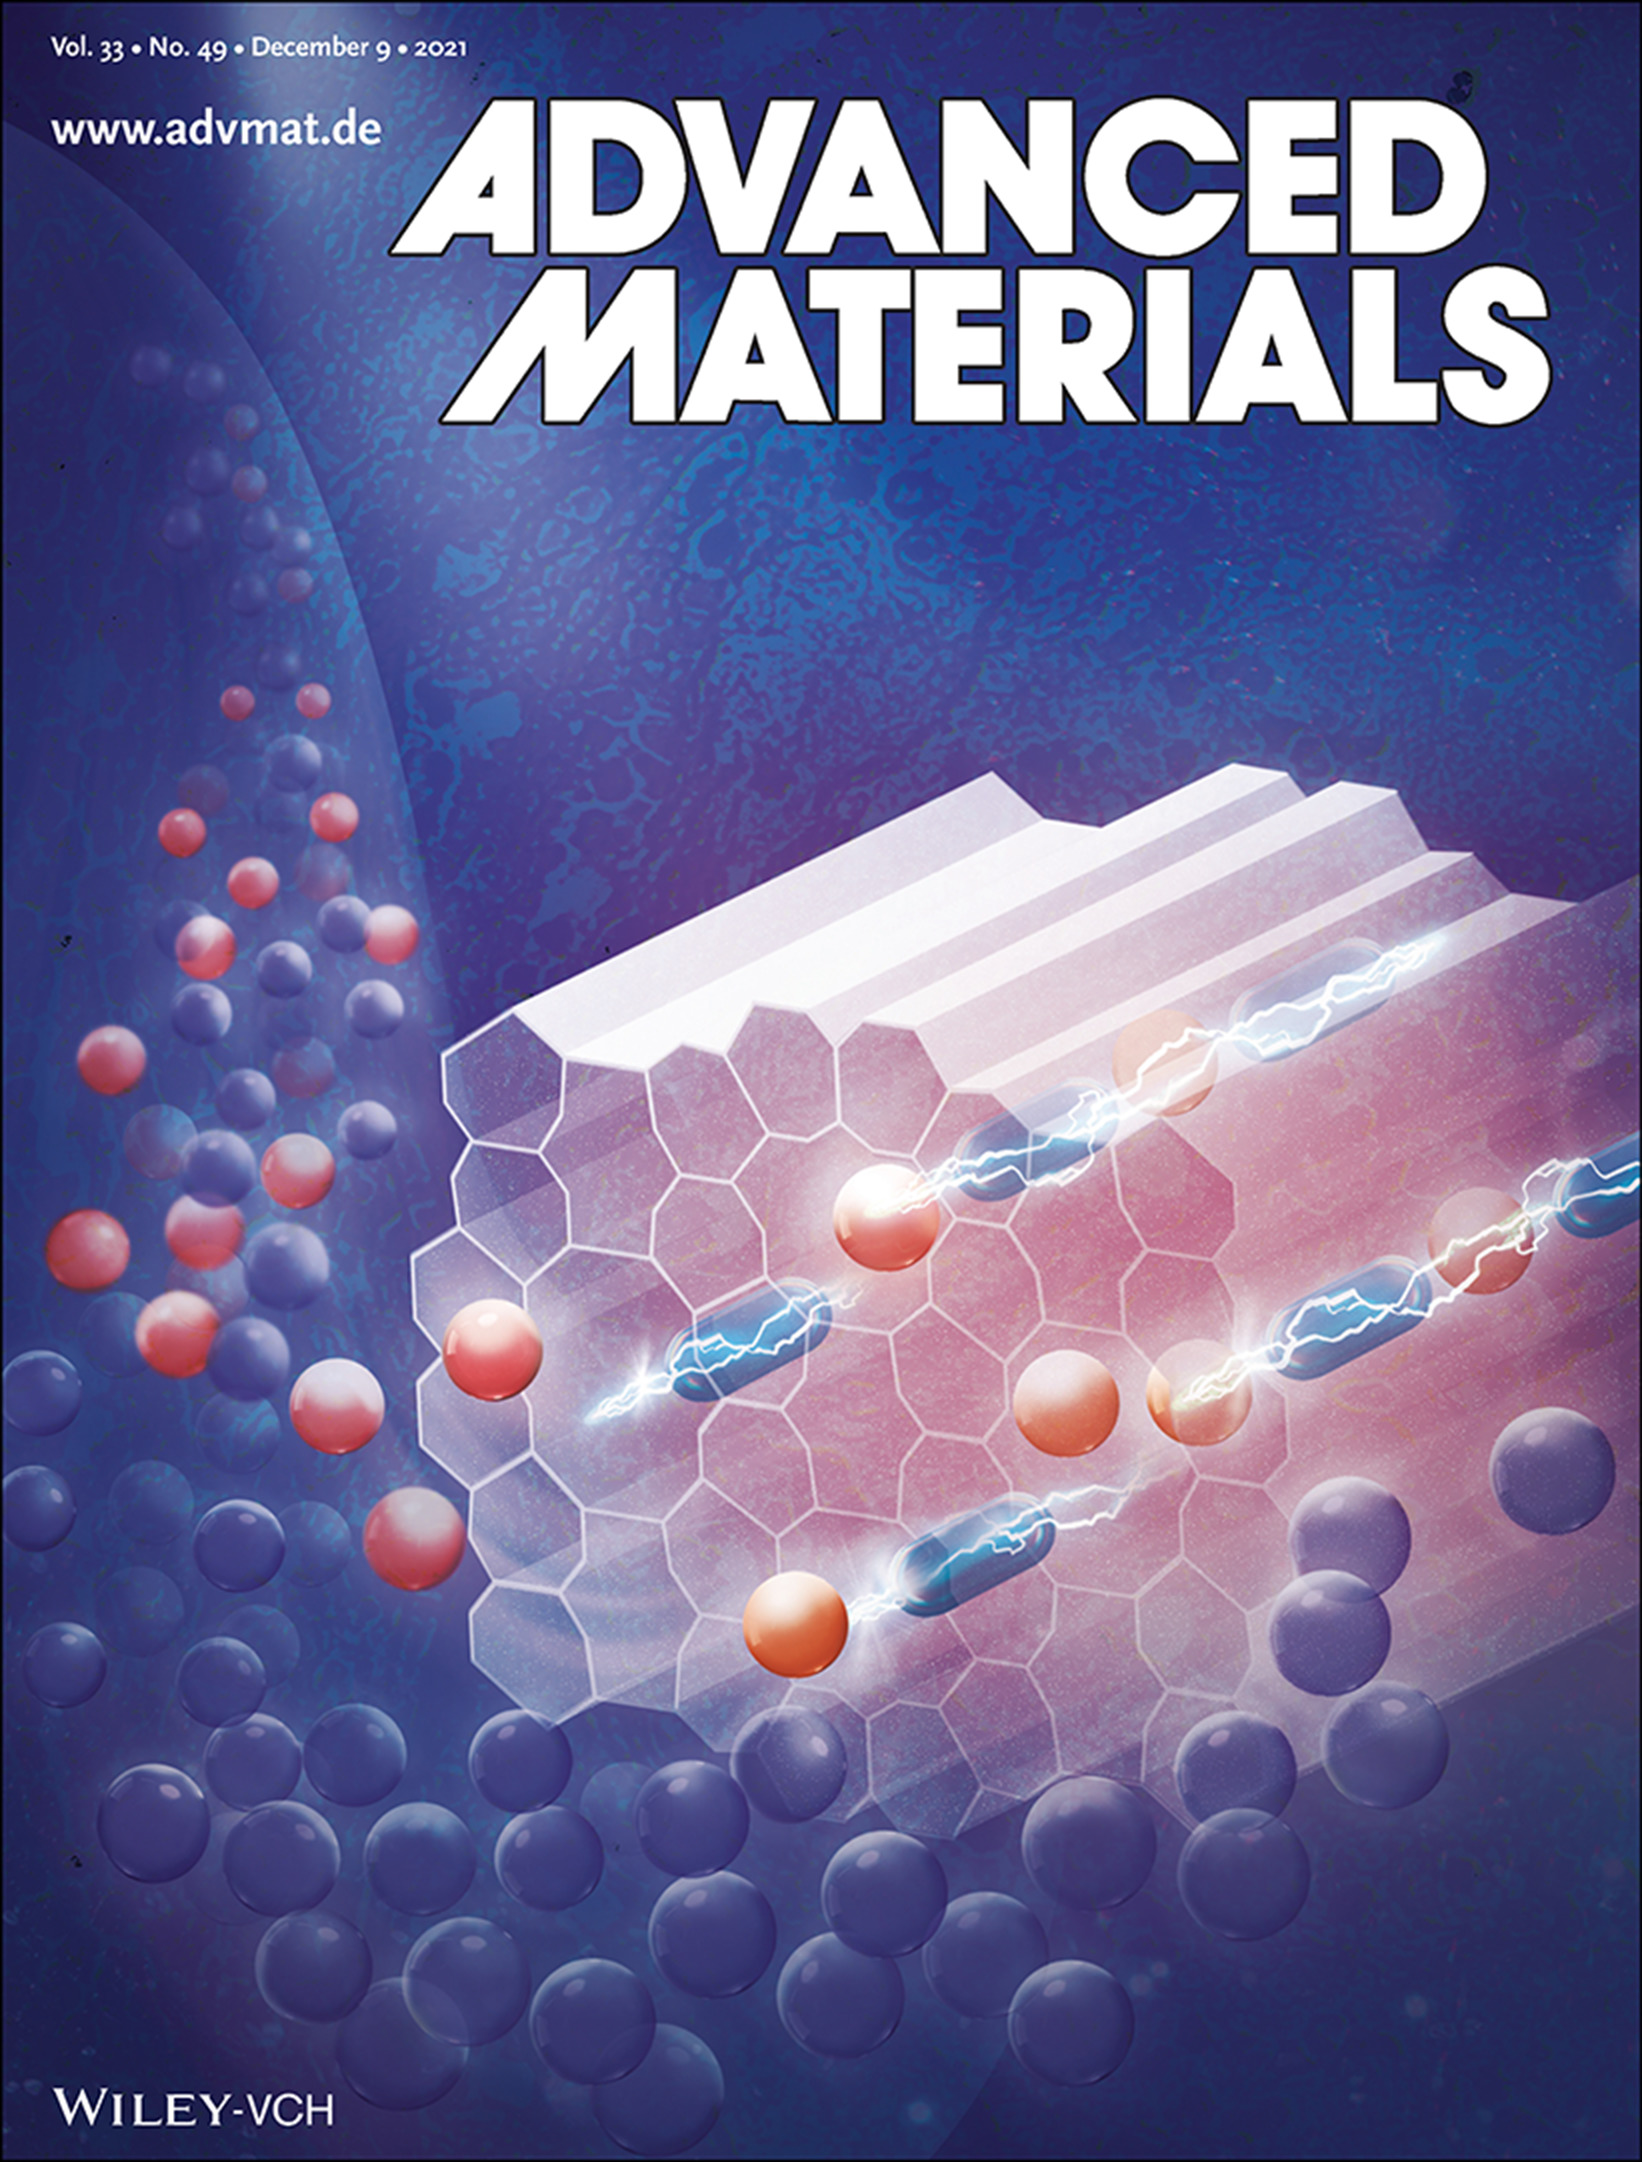 Cover of our Advanced Materials article